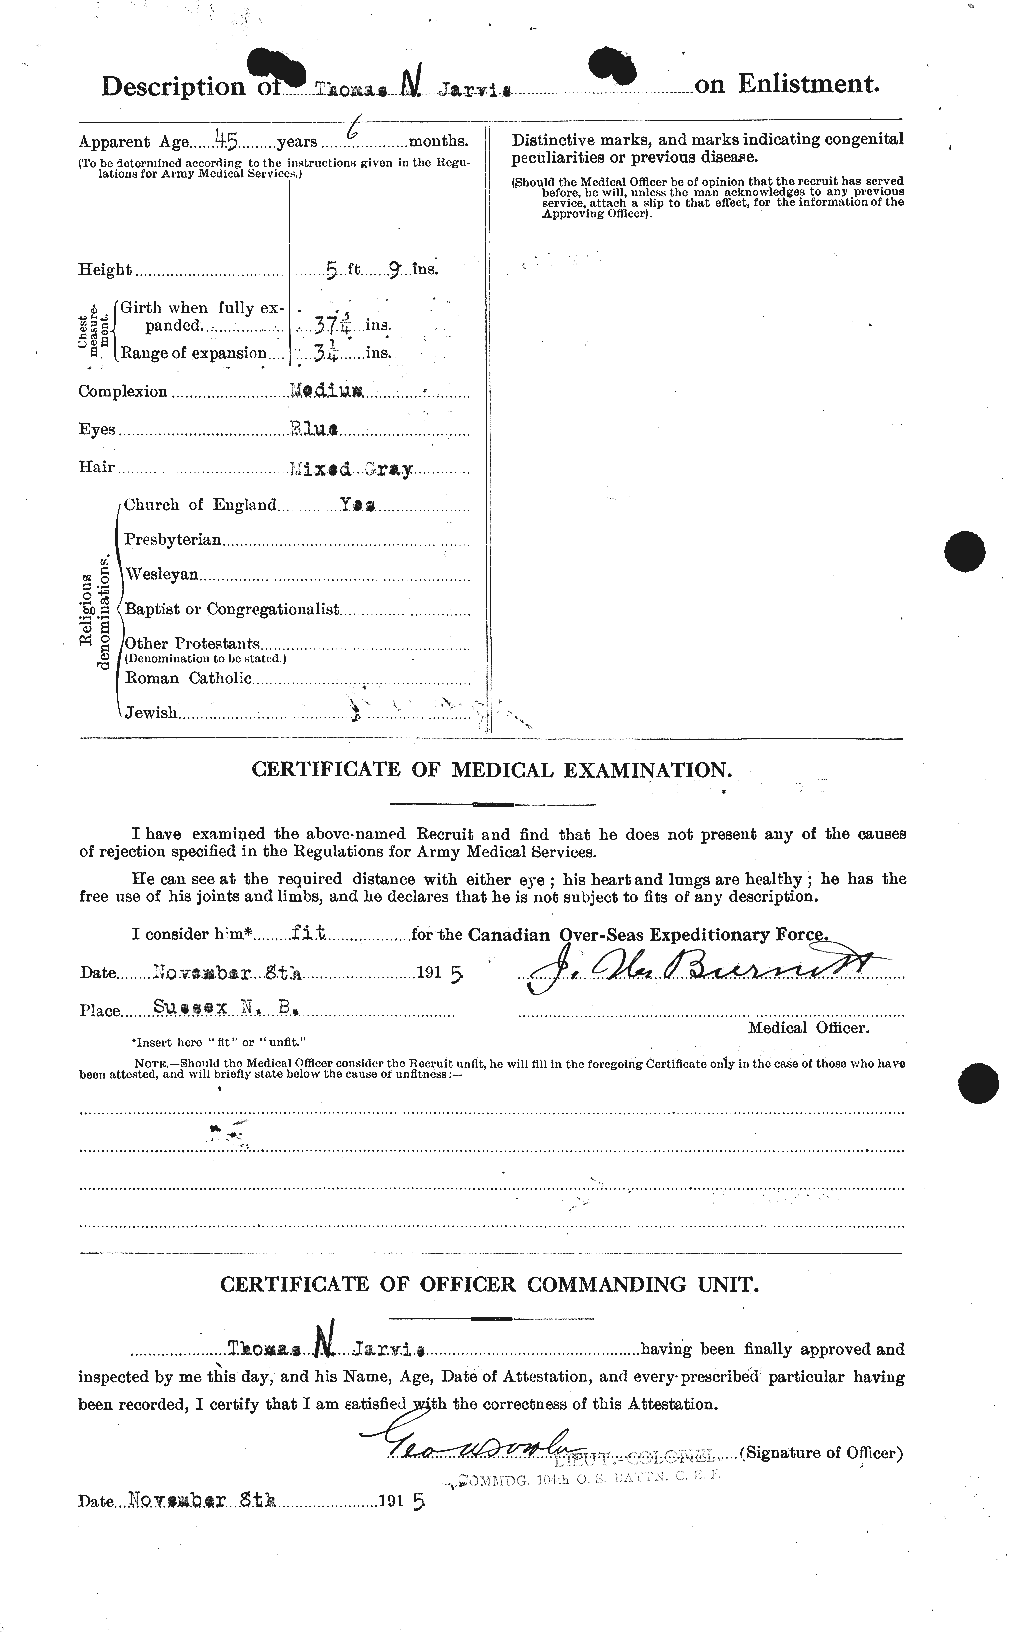 Personnel Records of the First World War - CEF 415864b